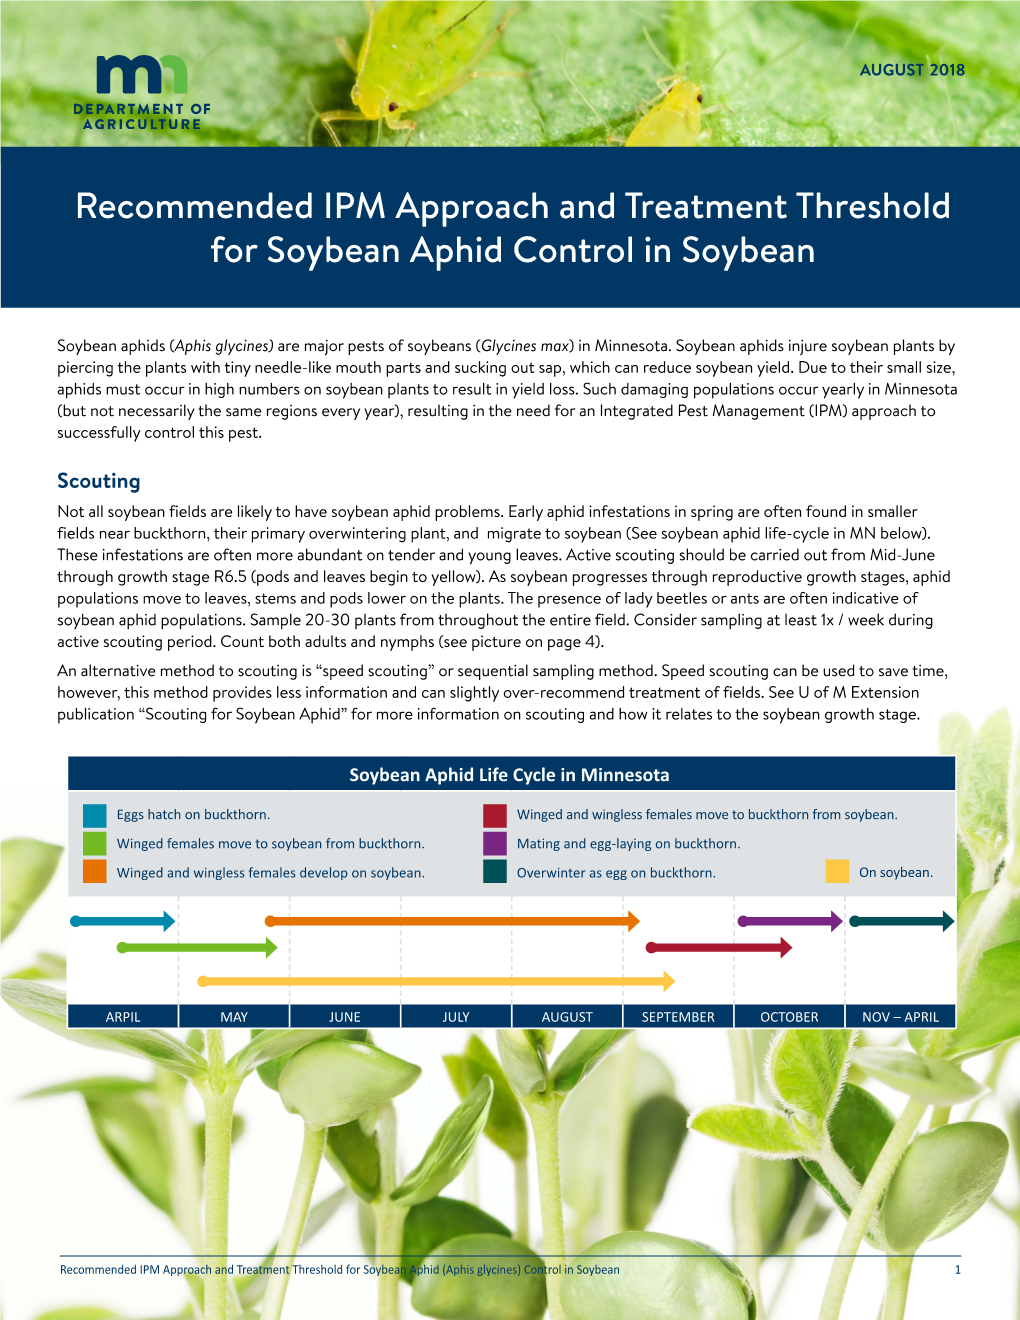 Recommended IPM Approach and Treatment Threshold for Soybean Aphid Control in Soybean